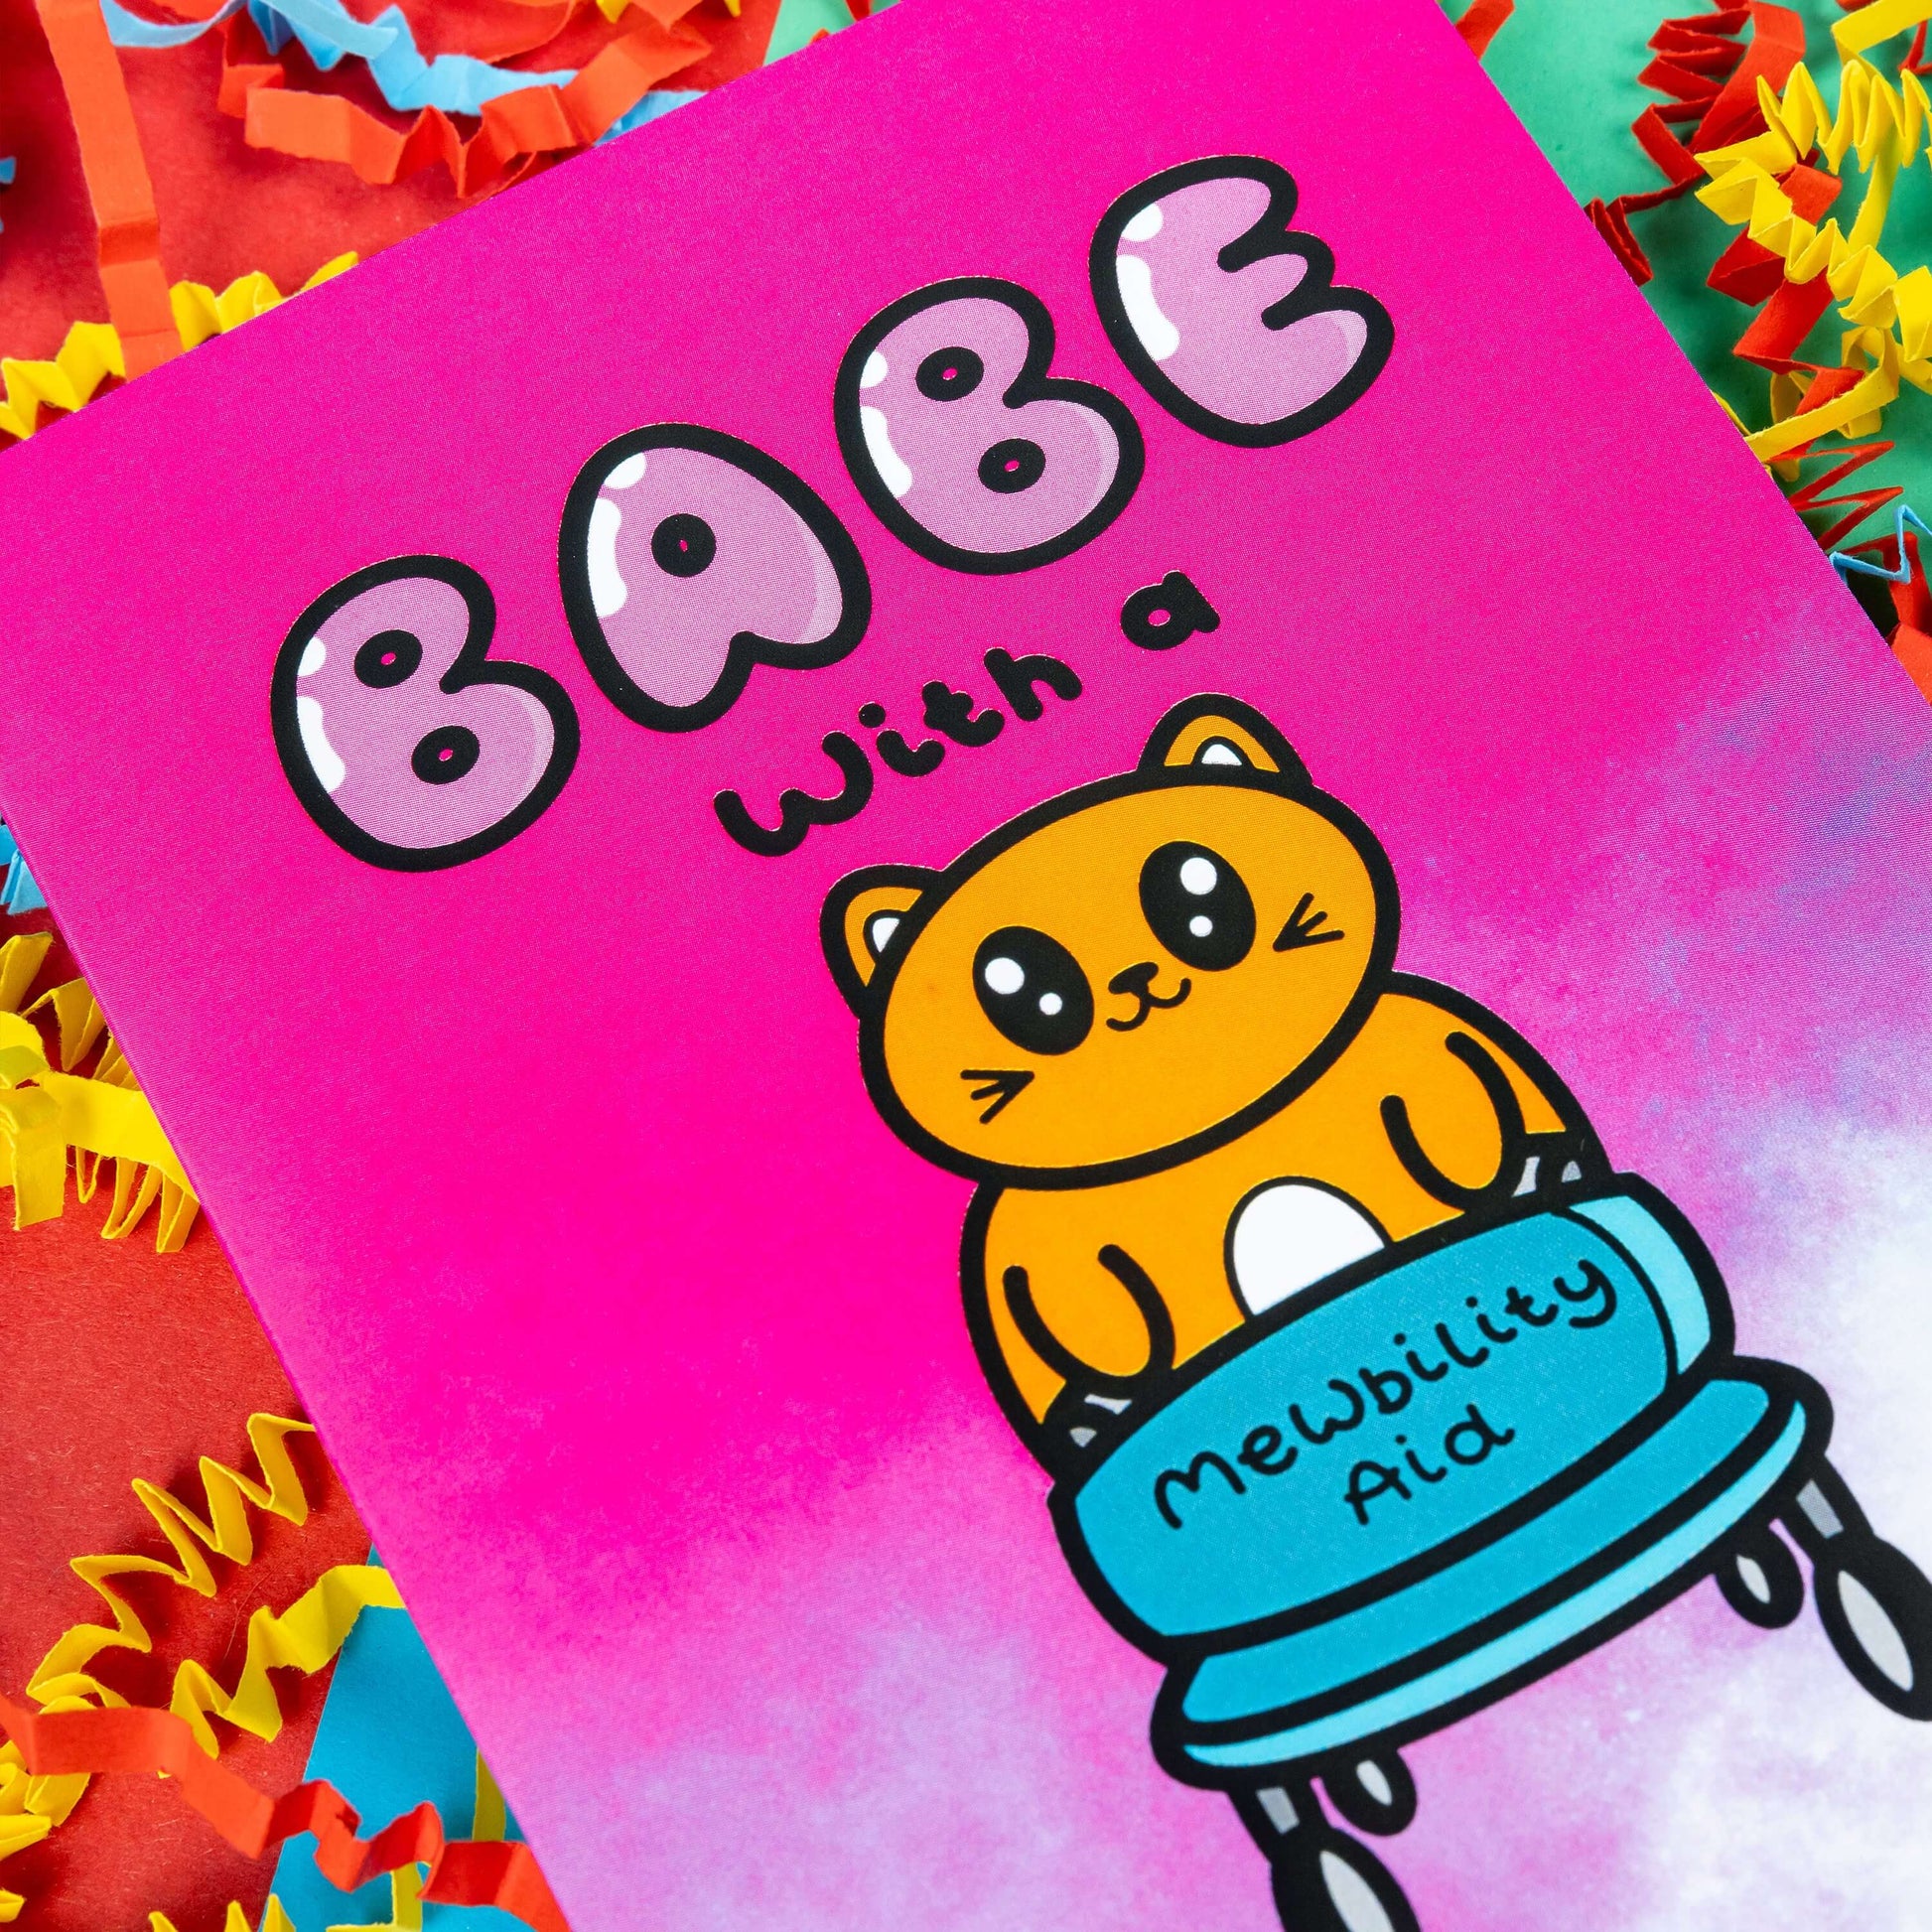 Close up of a hot pink and white gradient greeting card with a cute ginger cat holding a blue mobility aid. 'Babe with a mewbility aid' is written on the card. The background of the photo is colourful card confetti. Design inspired by disabilities and chronic illness.